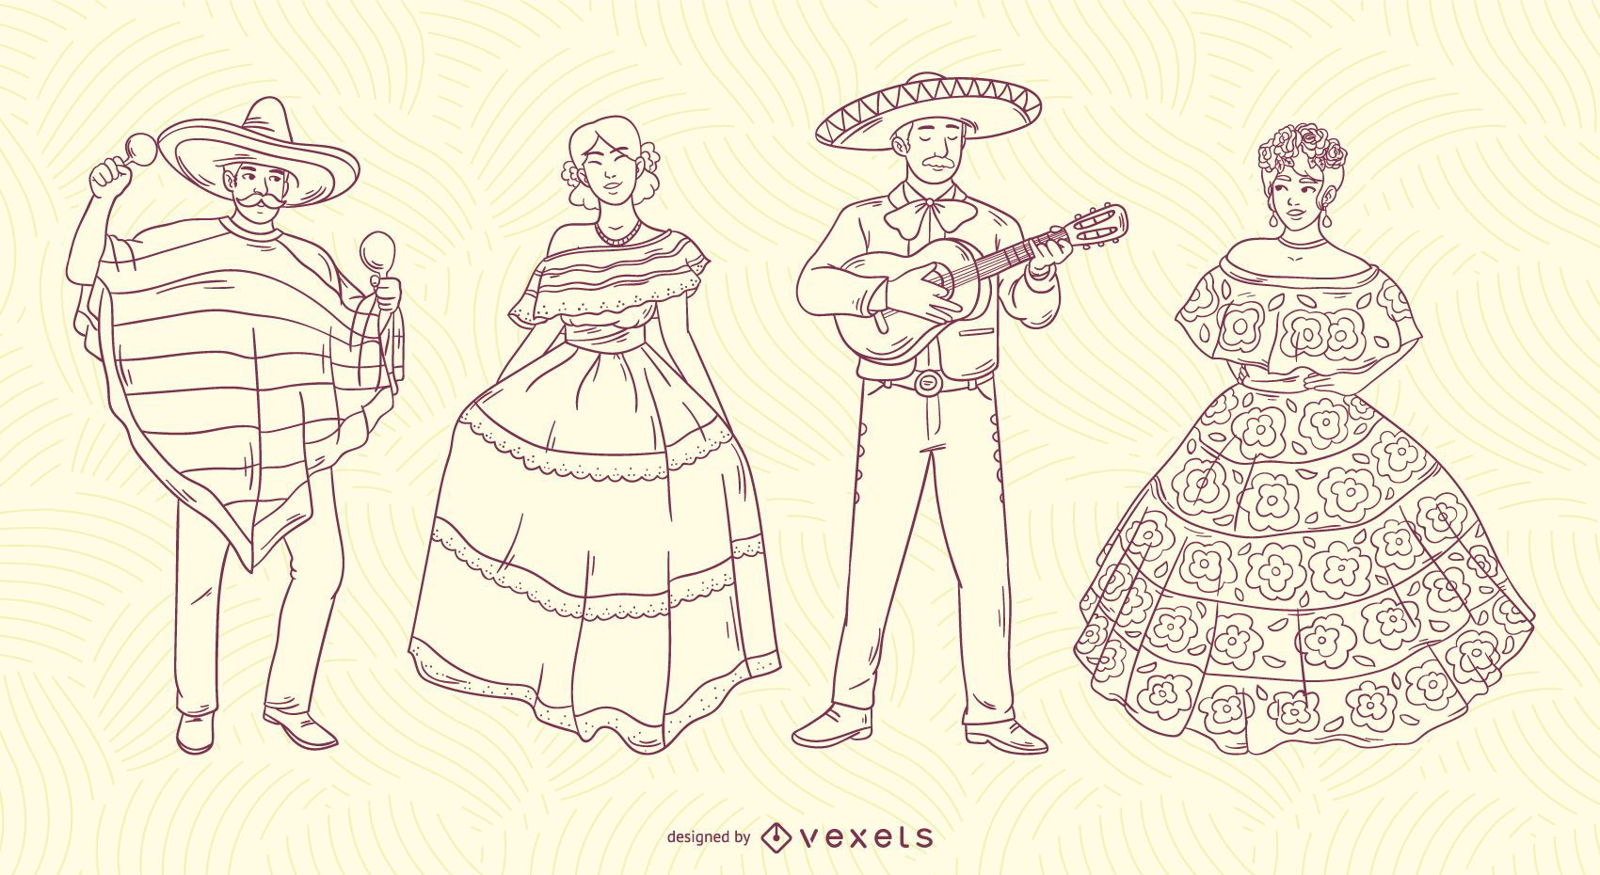 Mexican characters stroke set